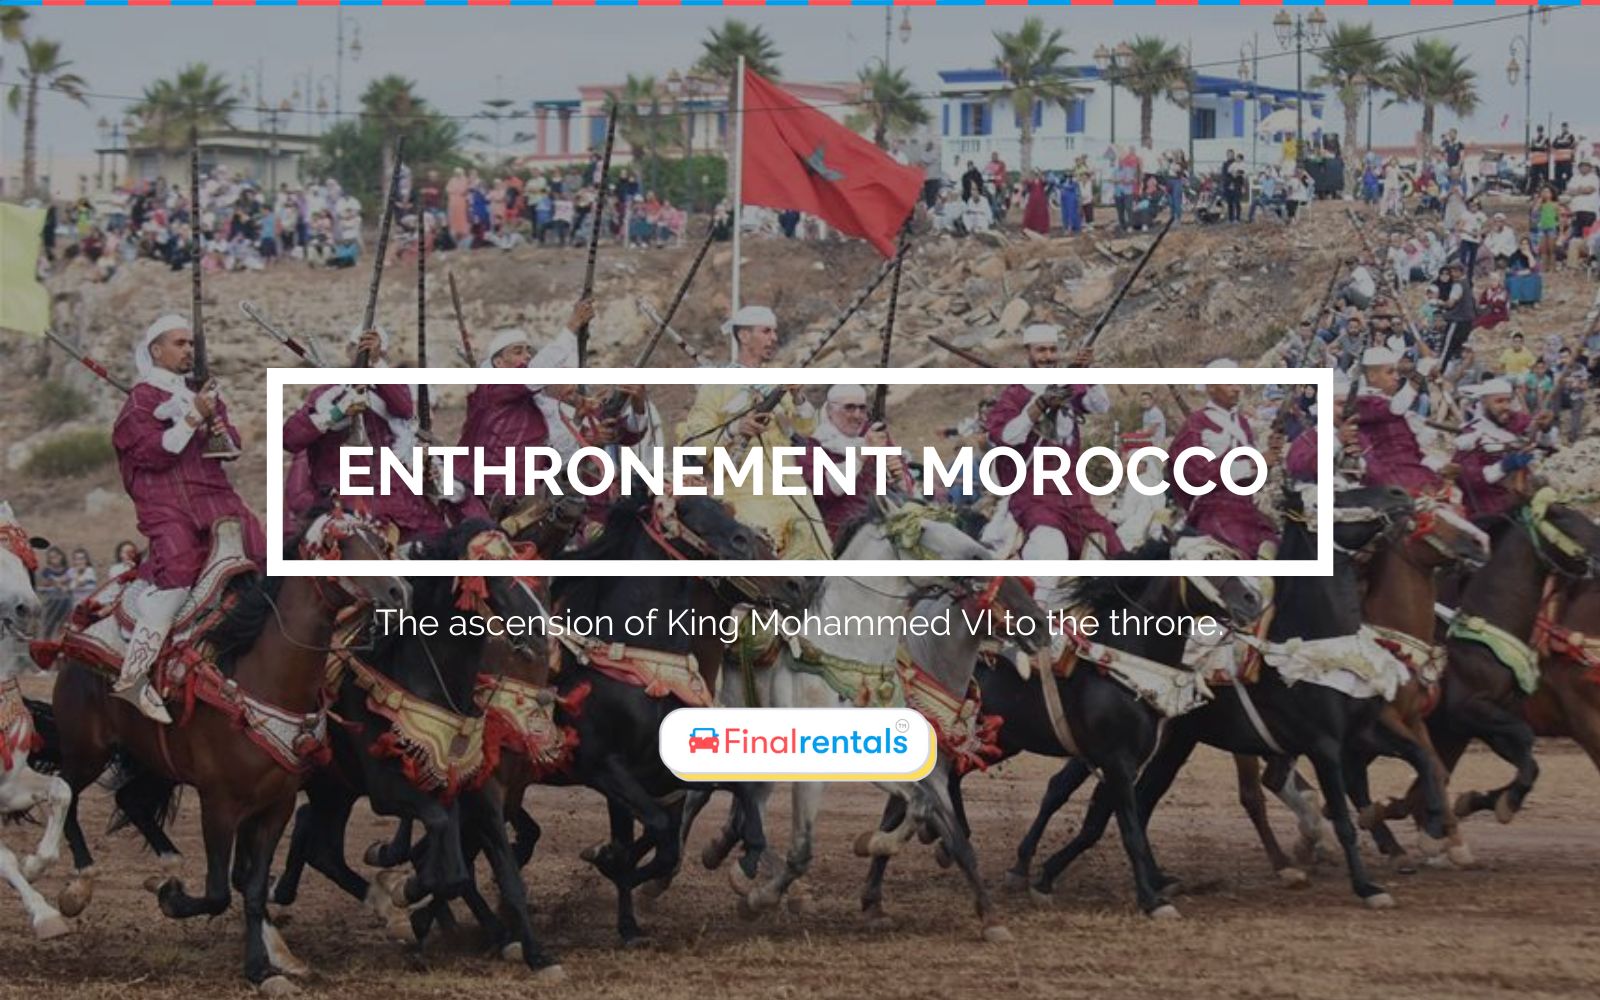 Enthronement in Morocco